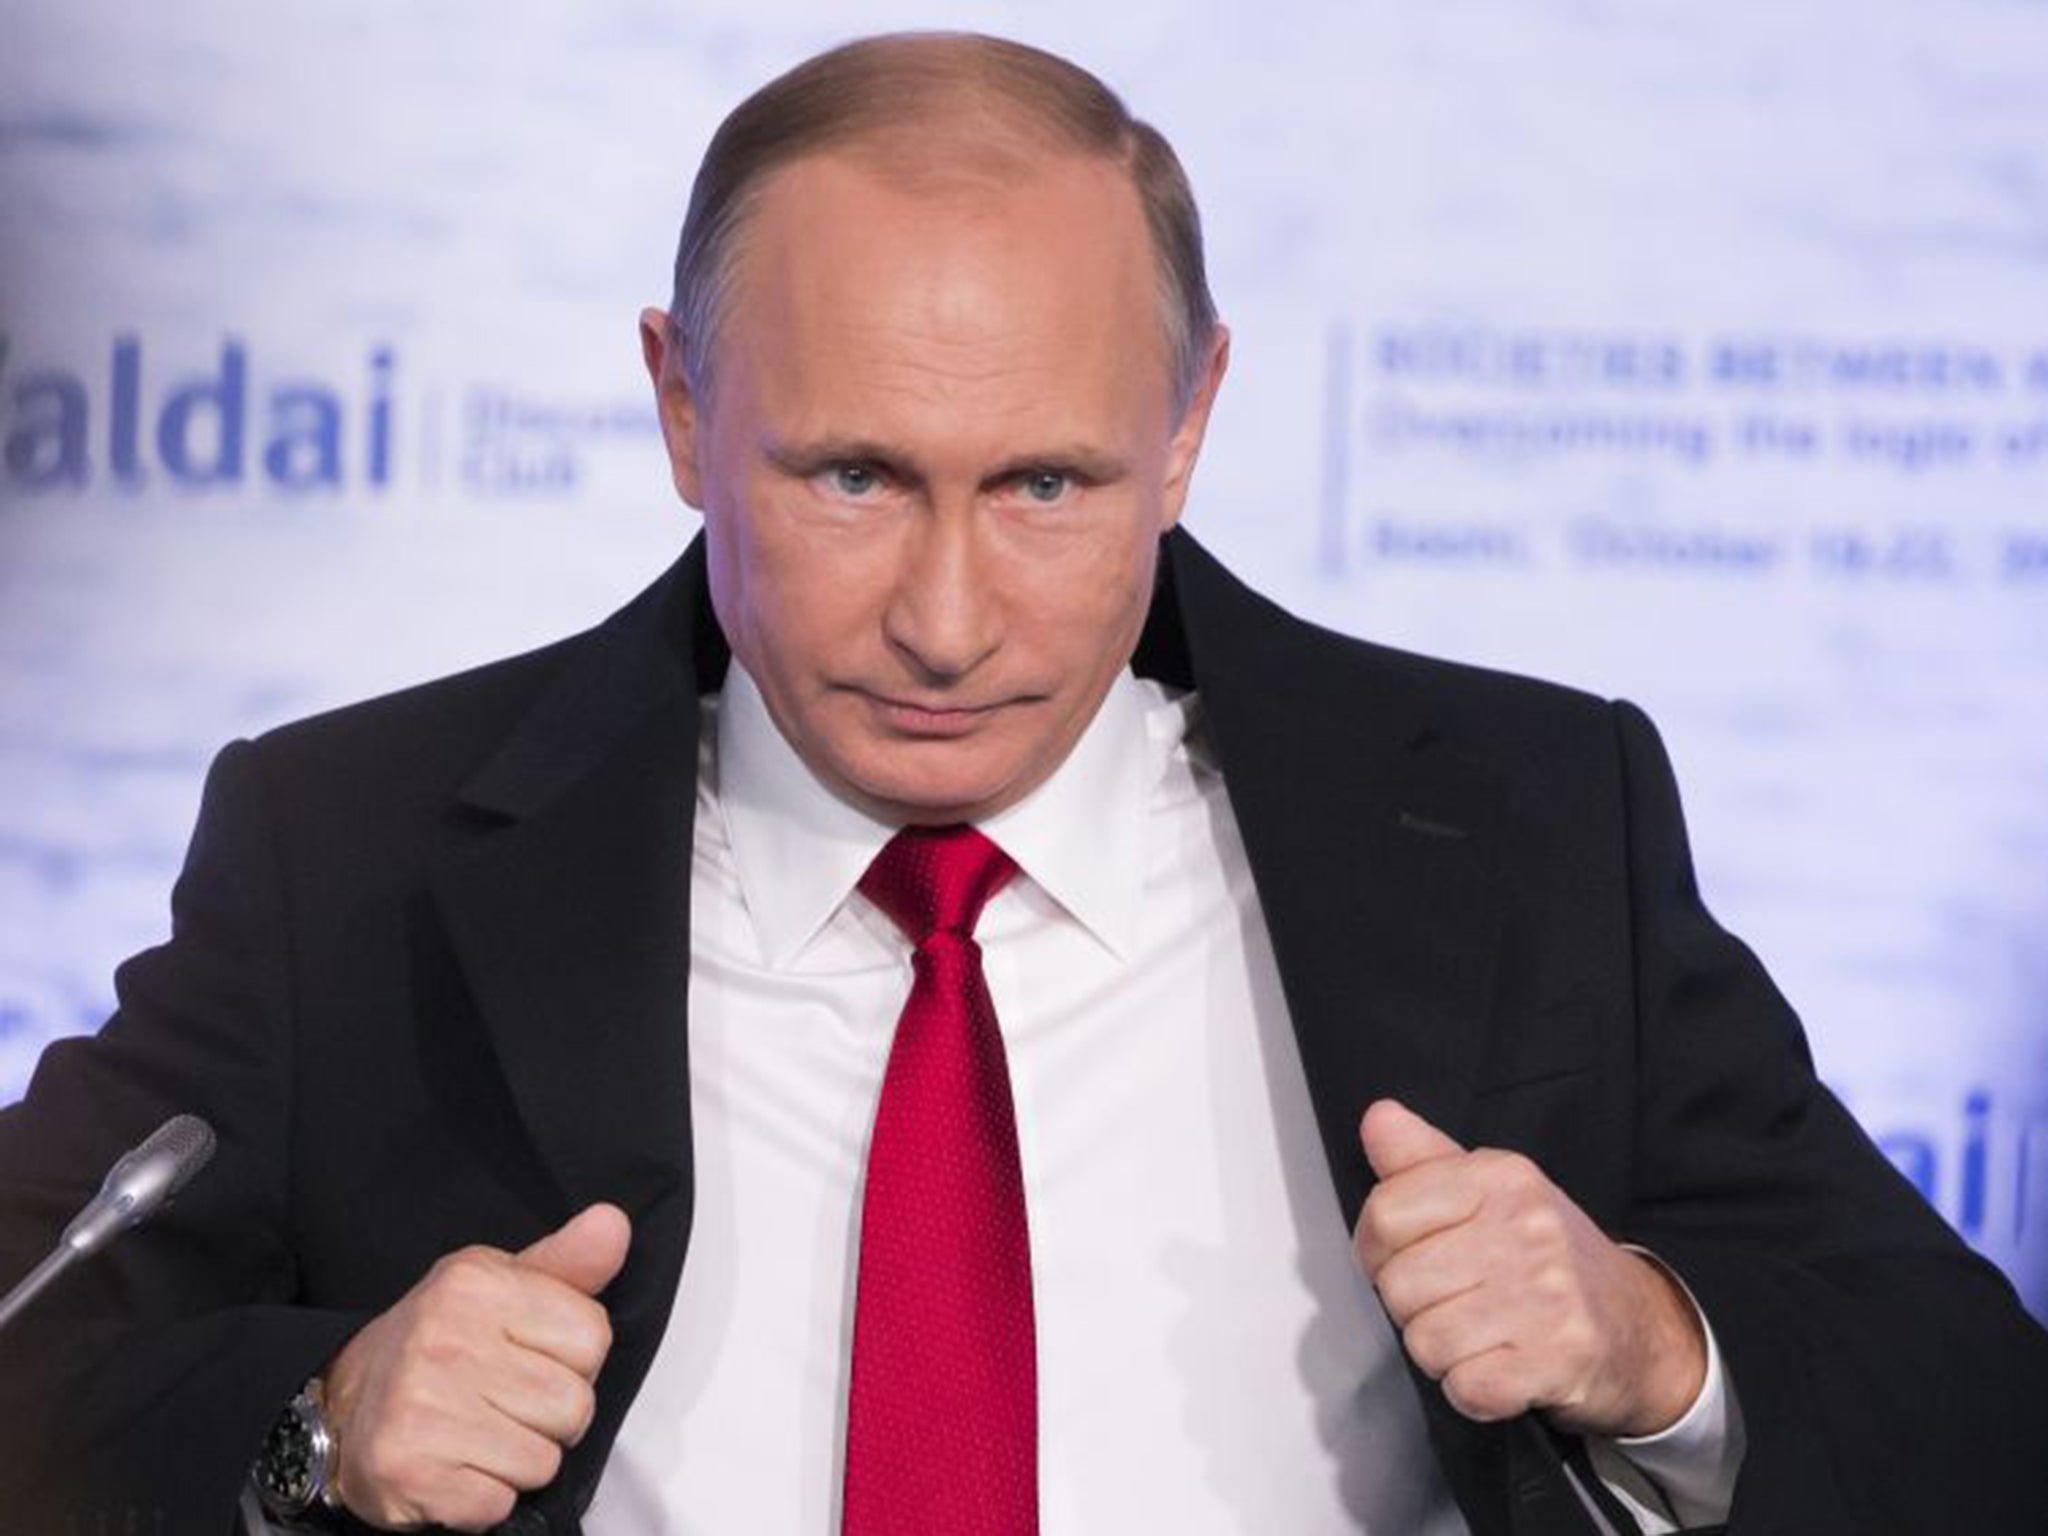 Vladimir Putin said his government will ‘pay this issue the greatest attention’